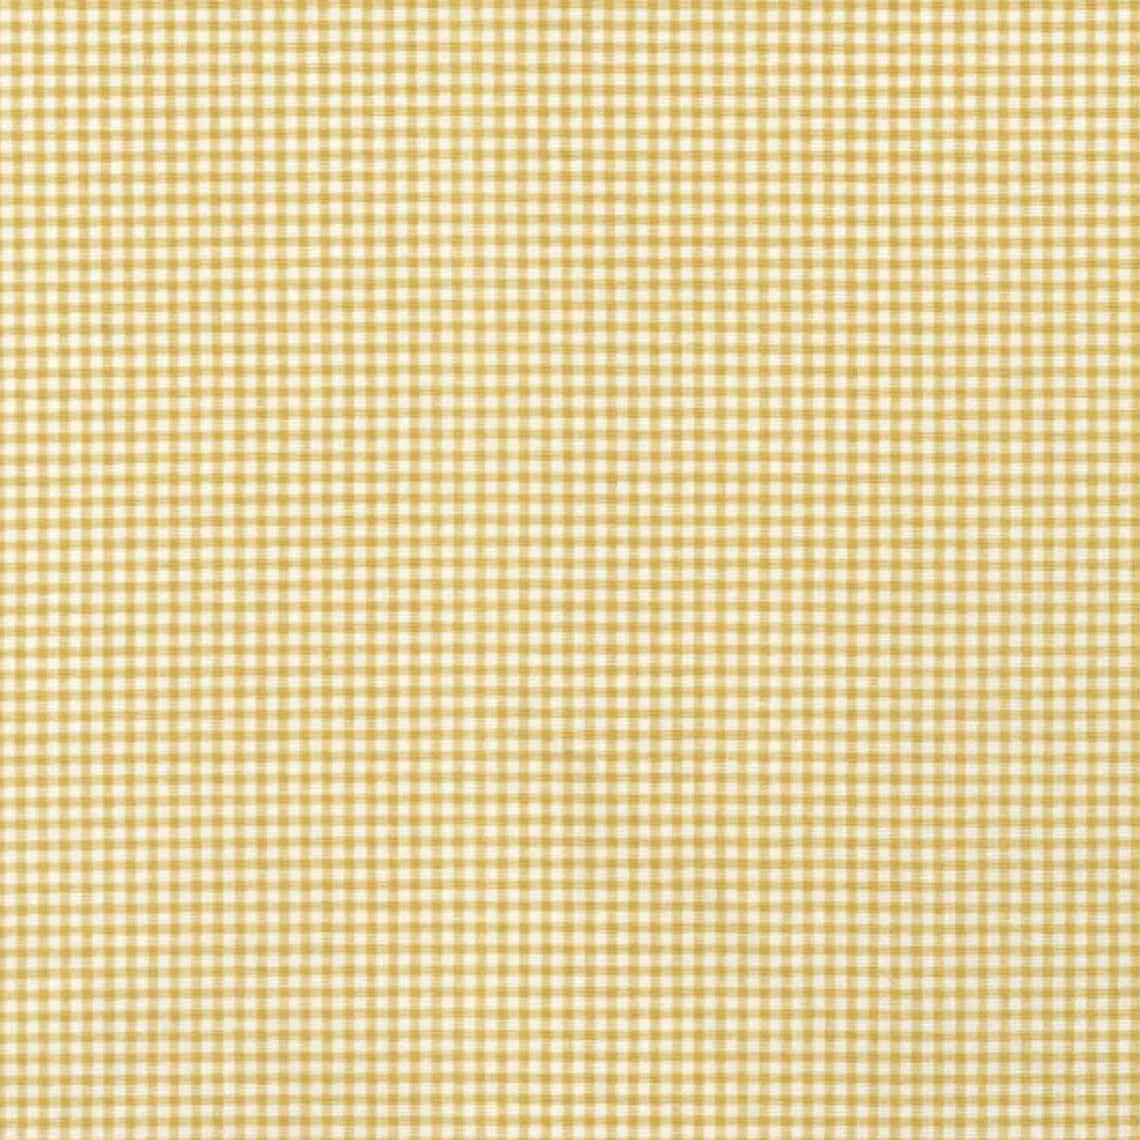 scalloped valance in farmhouse barley yellow gold gingham check